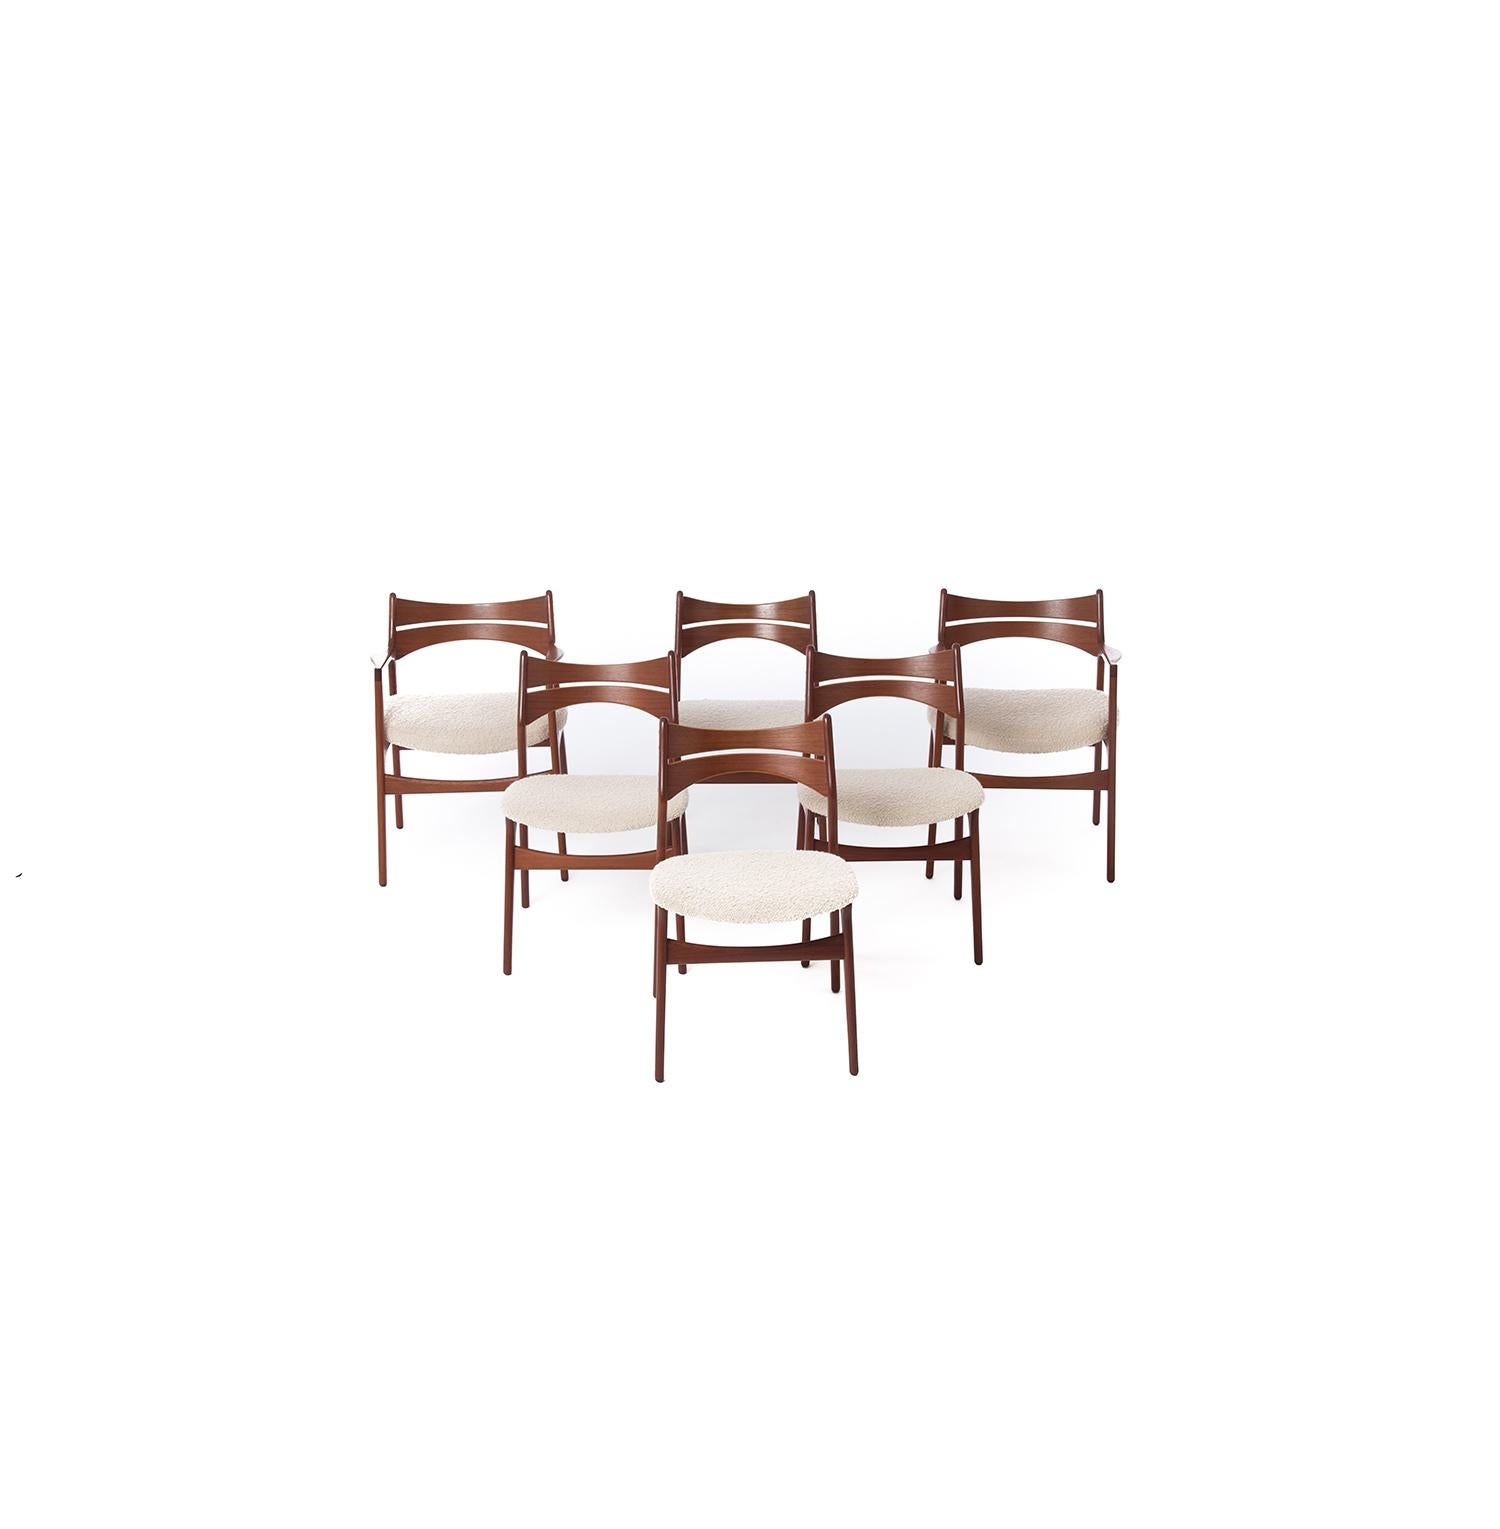 This set of 6 teak dining chairs features two captain's chairs and four side chairs. The backrest's accentuated curvature mixed with the plush wool bouclé seat makes the chairs both striking and comfortable. Fabric is in excellent condition with no